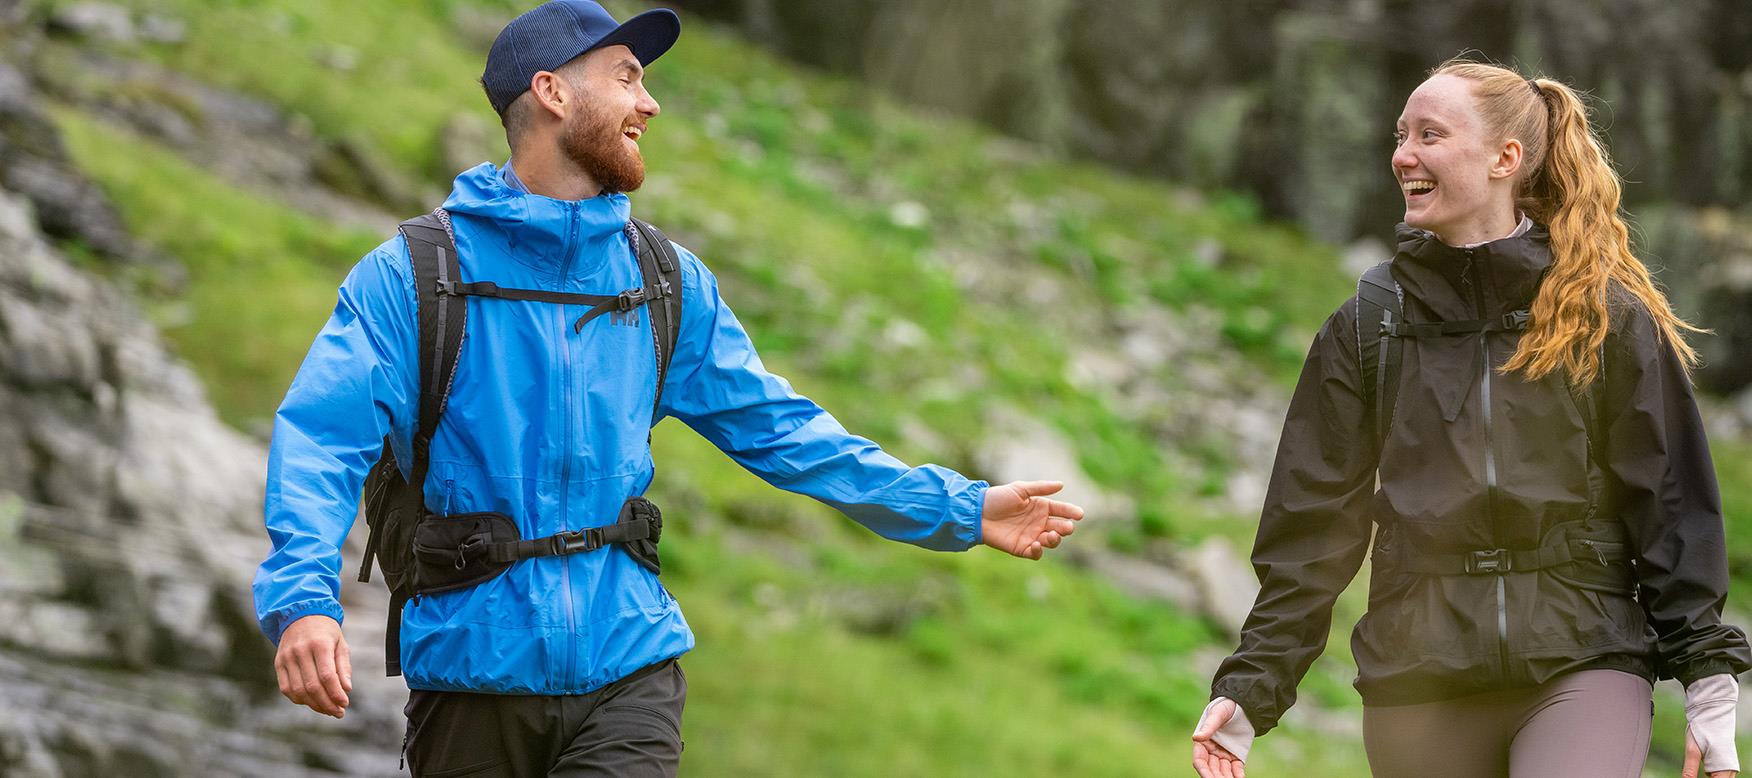 Man and woman laughing on a hike